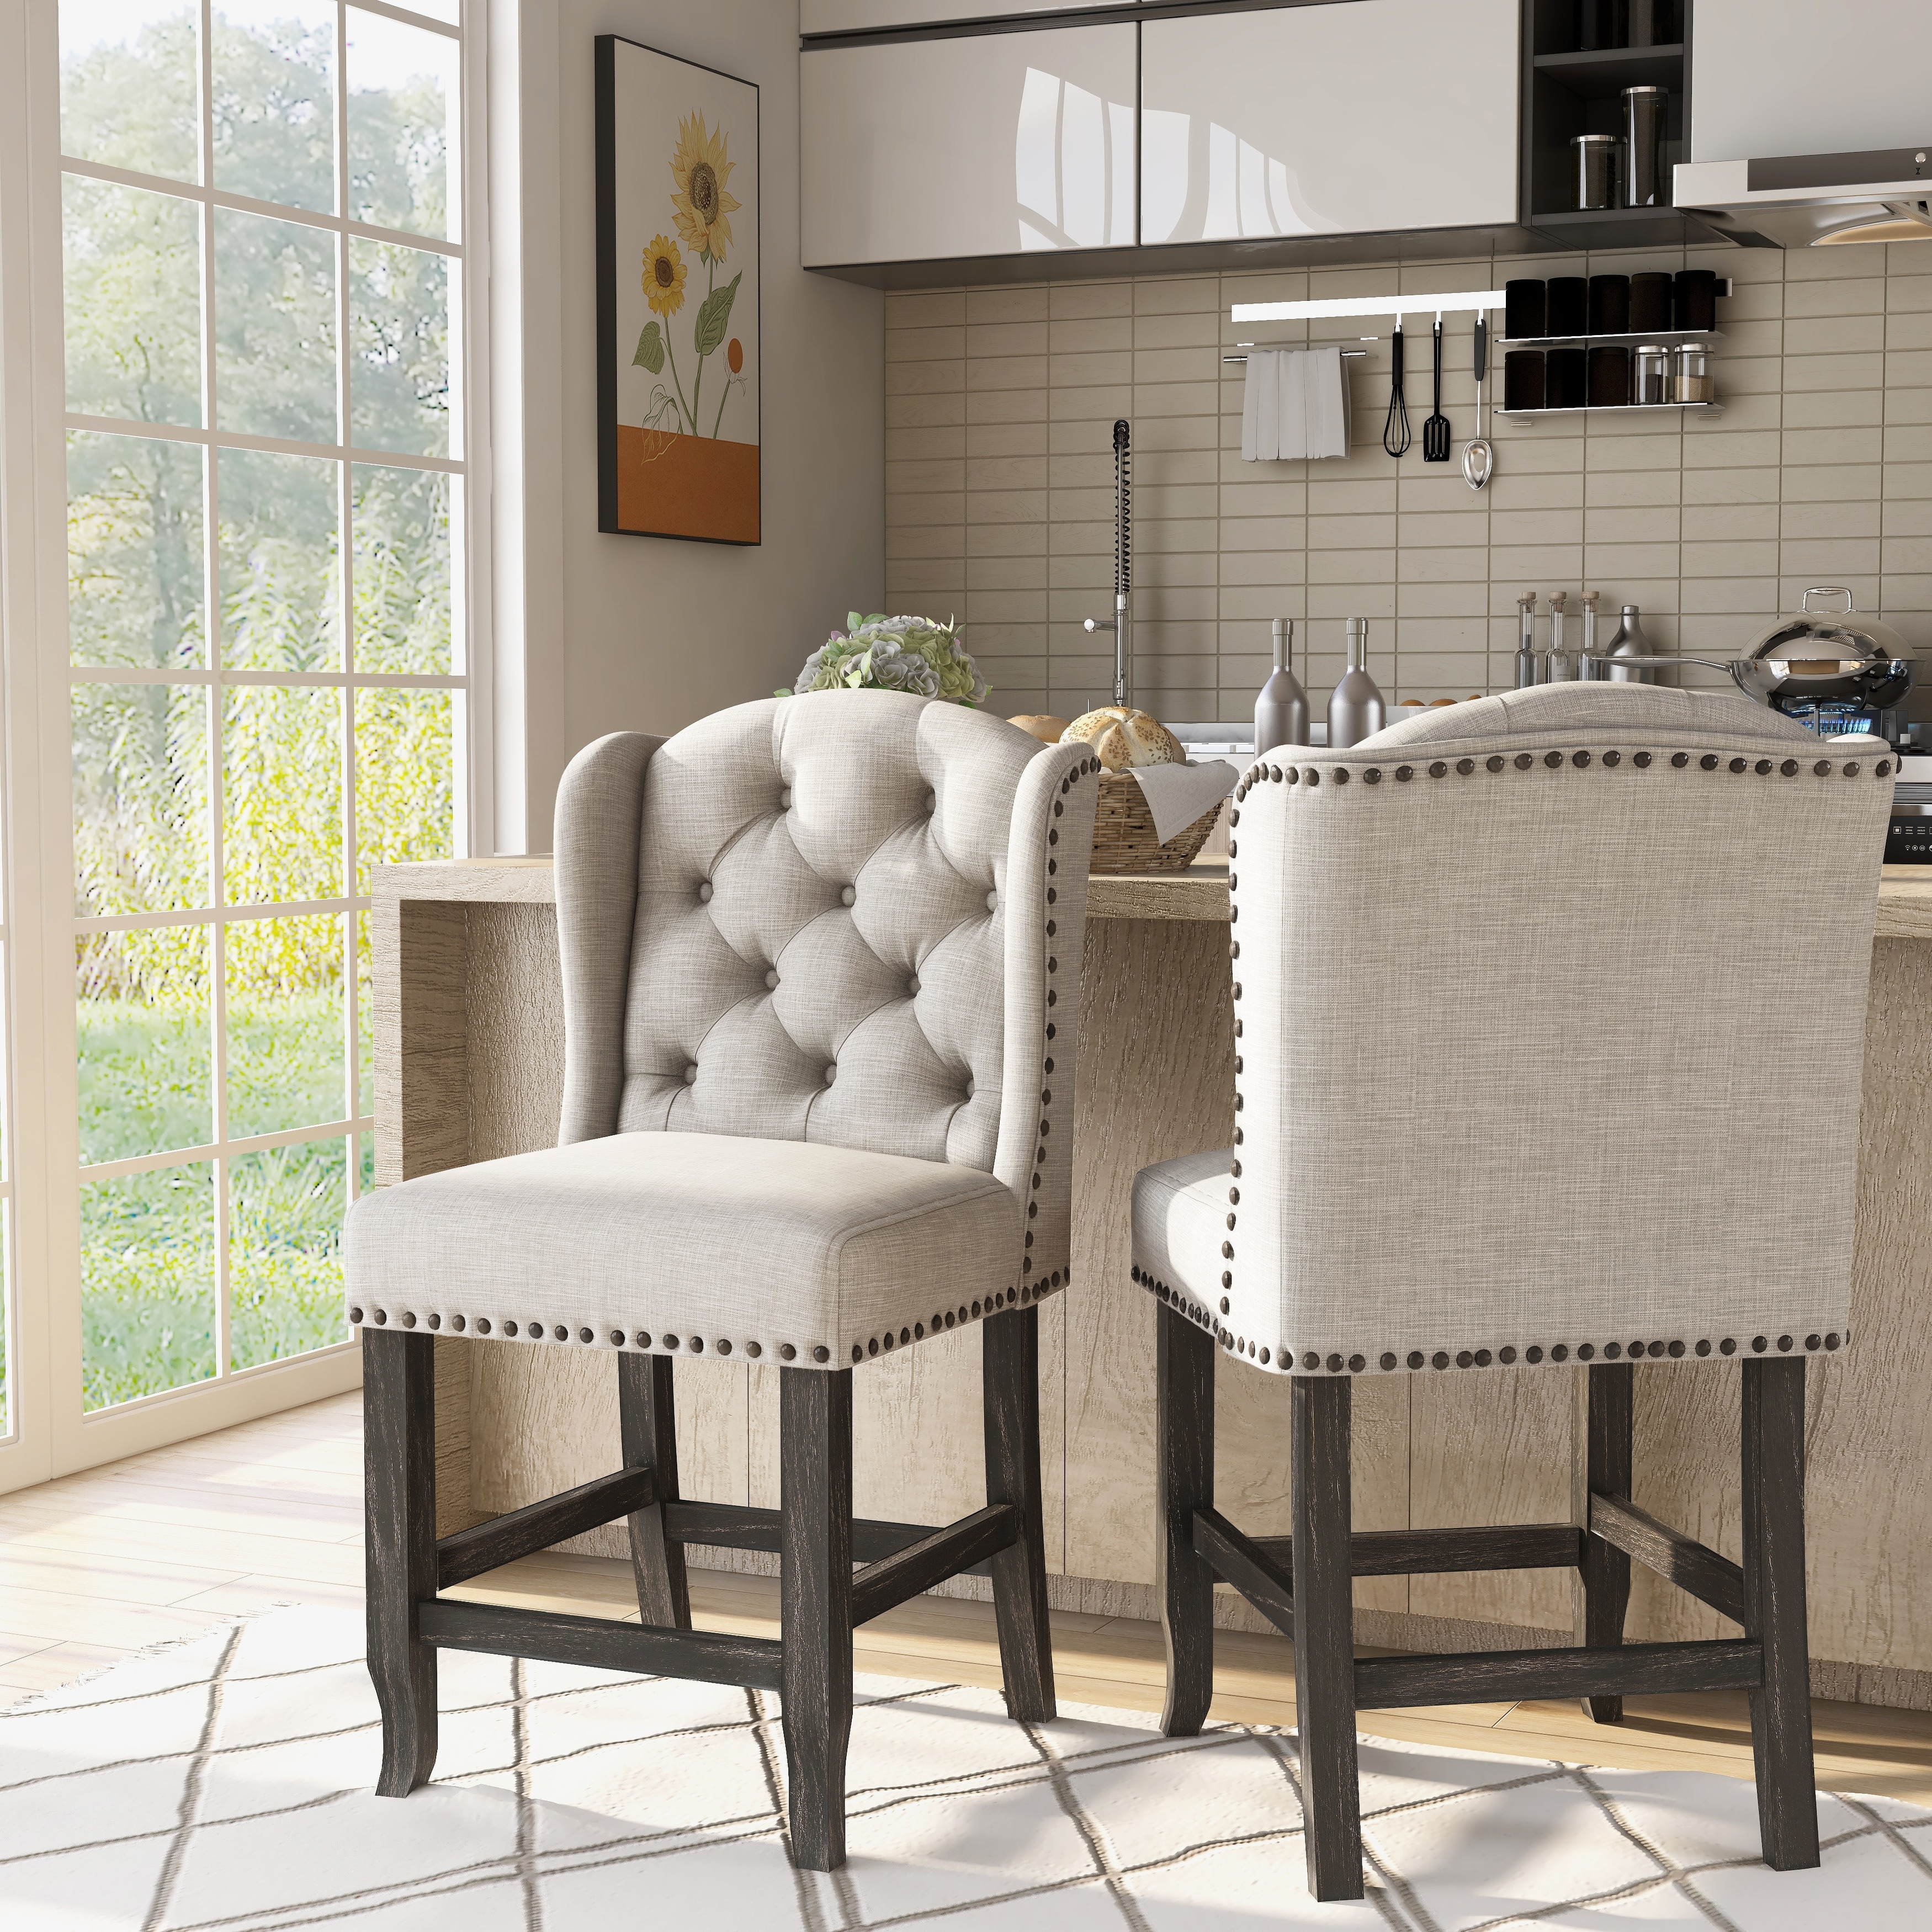 Essentials for Living Oliver Dining Chair - Set of 2